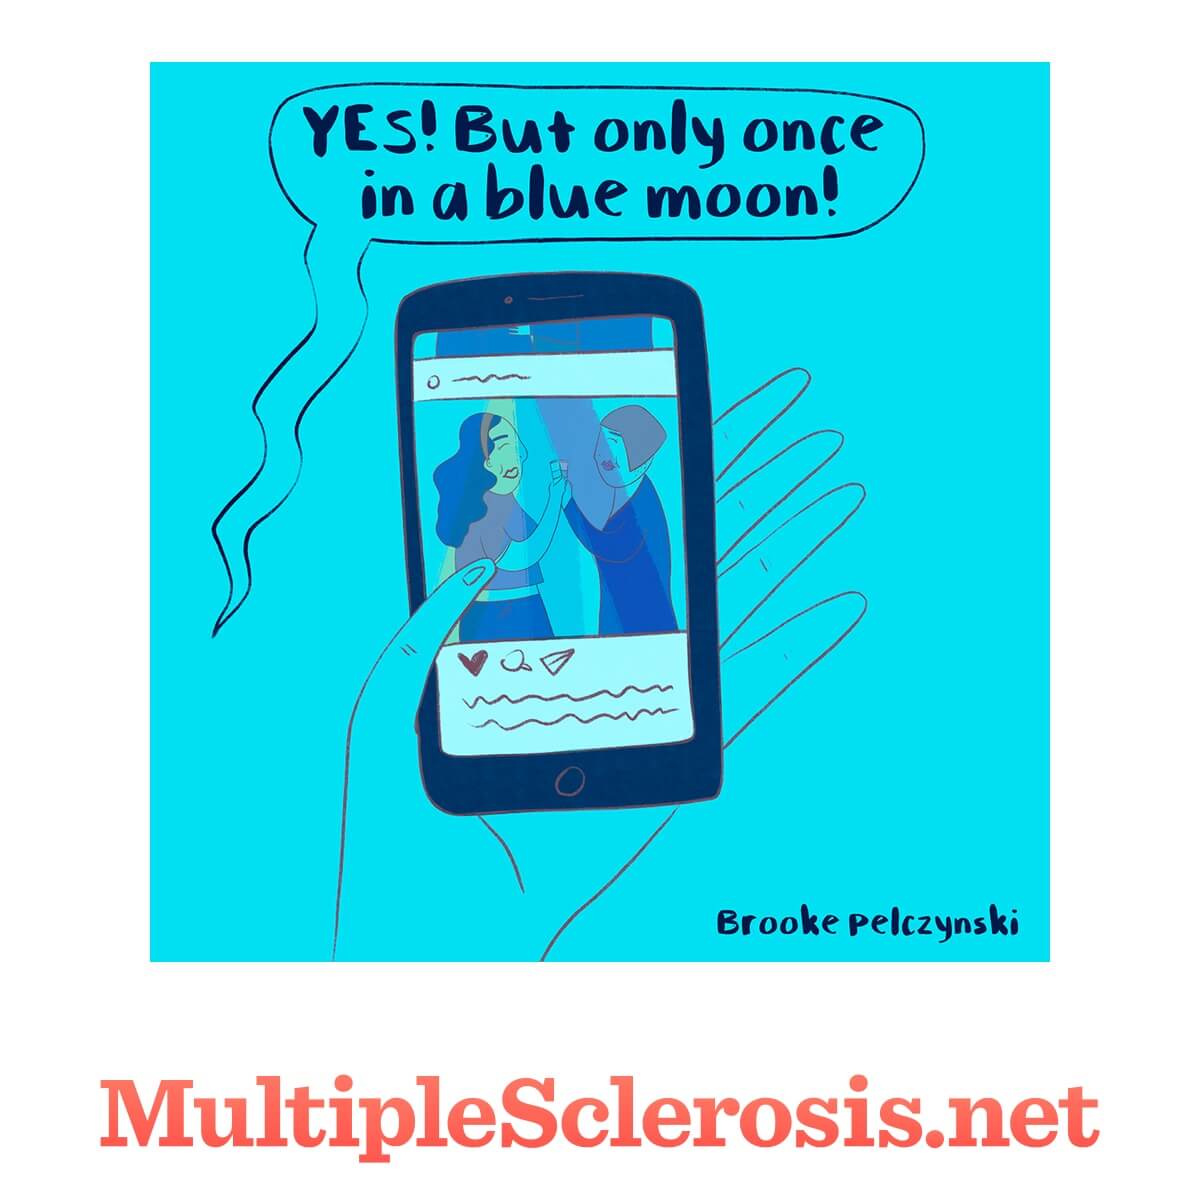 Woman holding a phone with an Image from social media. Text Reads: Yes! But only once in a blue moon!